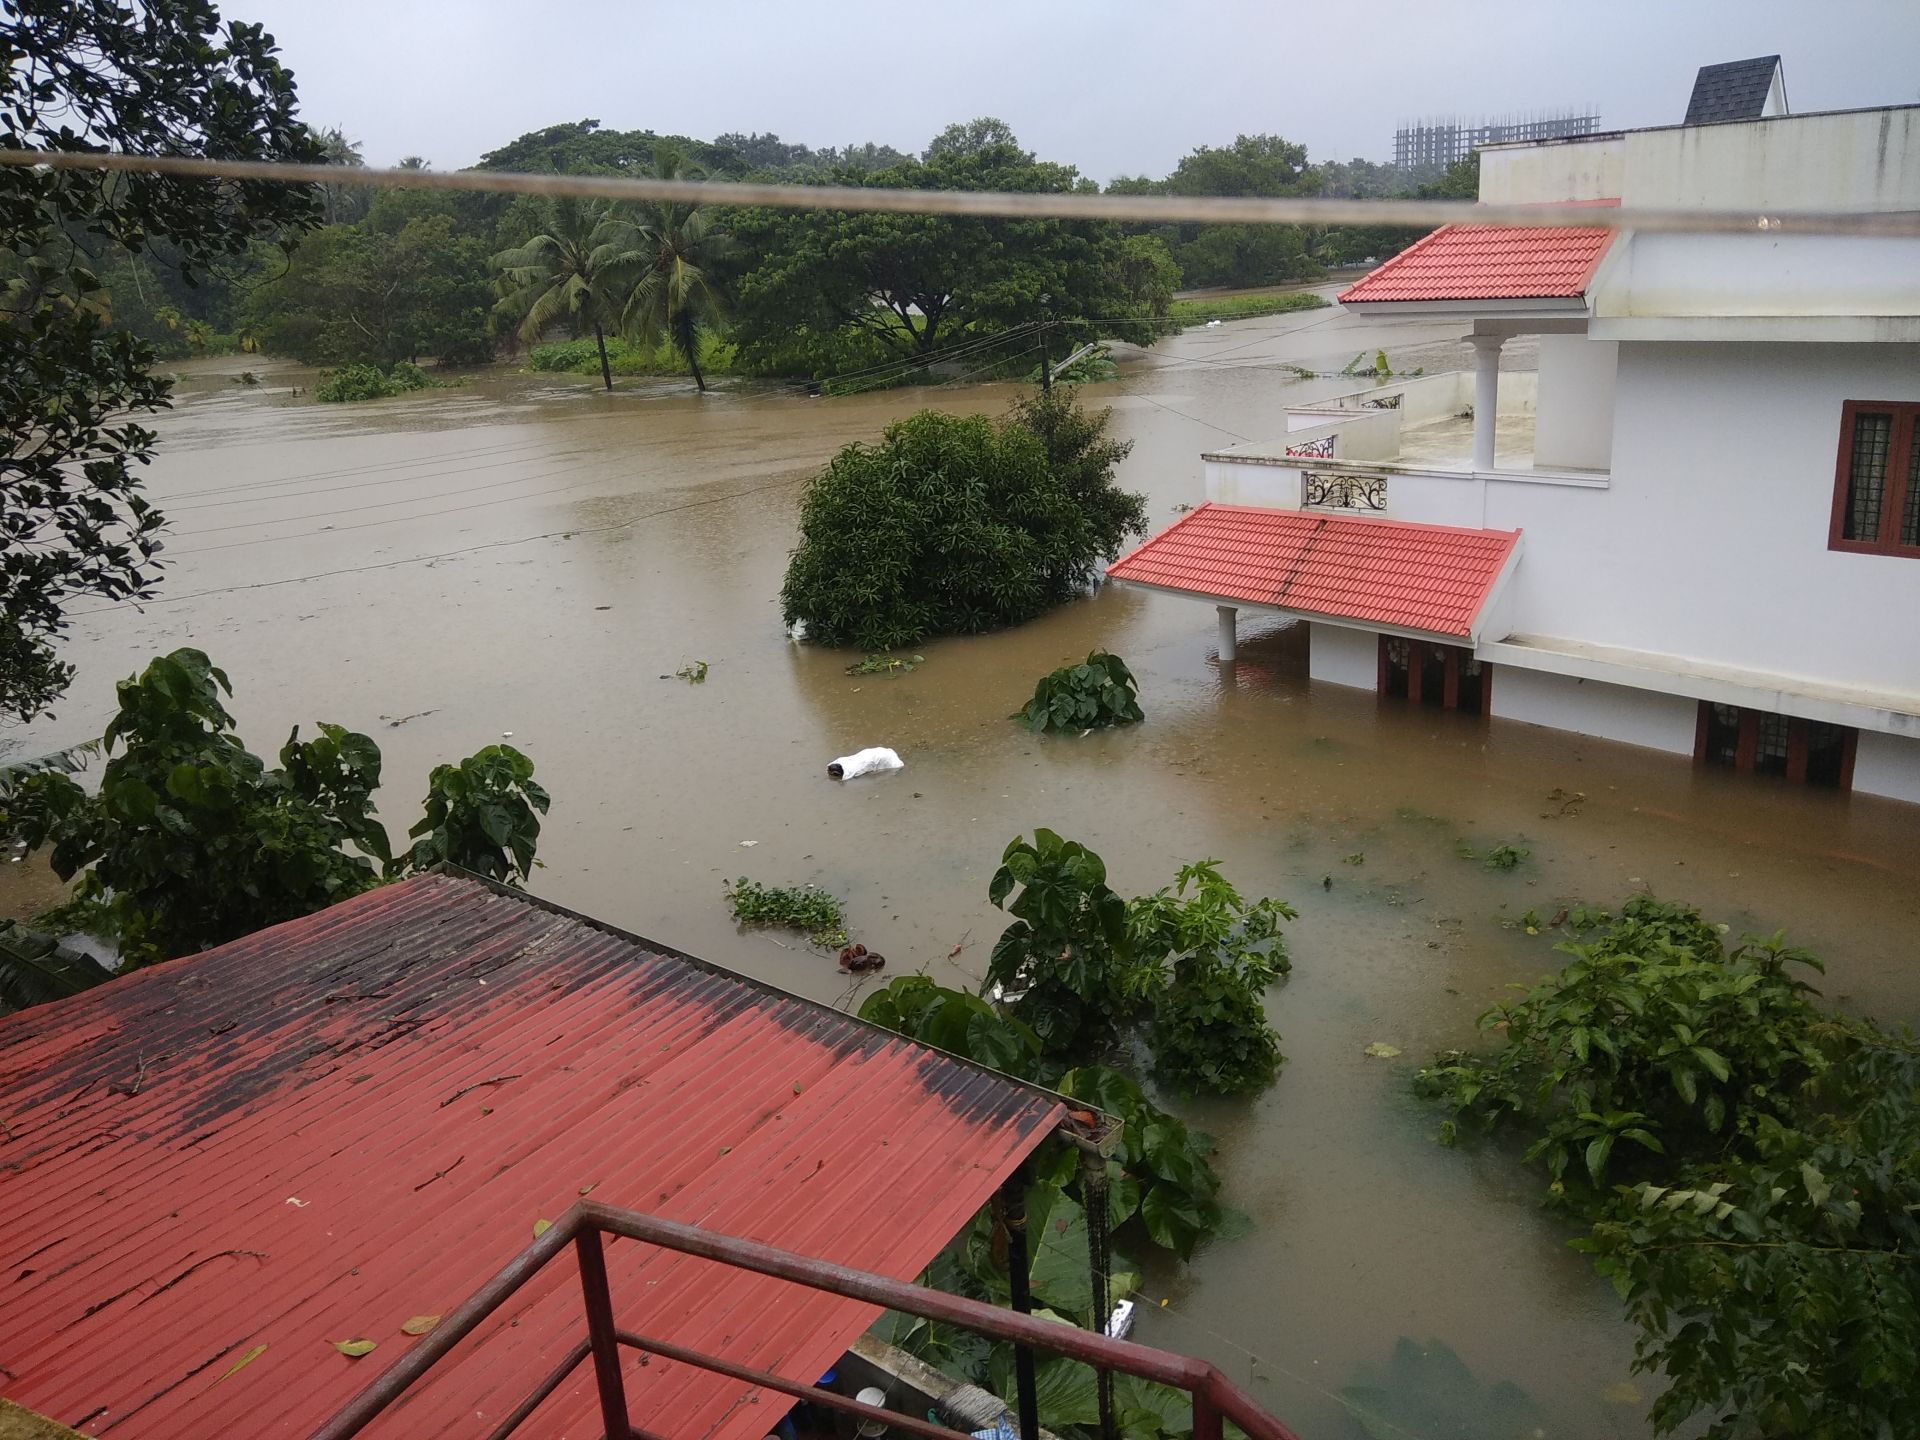 The losses to infrastructure due to the floods and landslides are huge. (Image: Ranjith Siji, Wikimedia Commons: CC BY-SA 4.0)